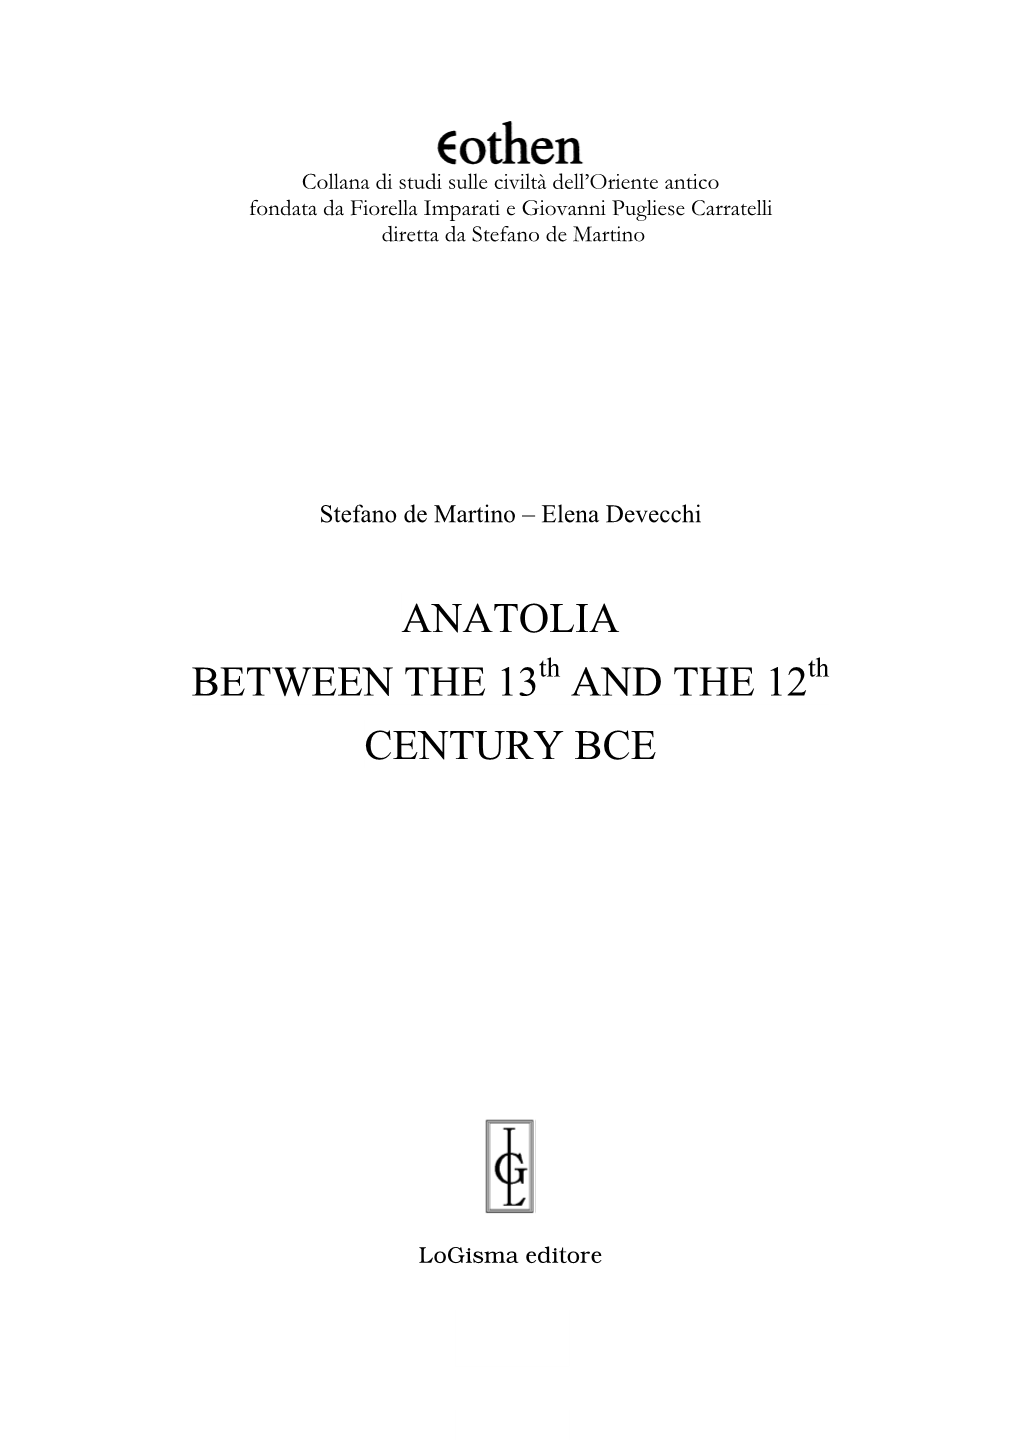 Anatolia Between the 13 and the 12 Century